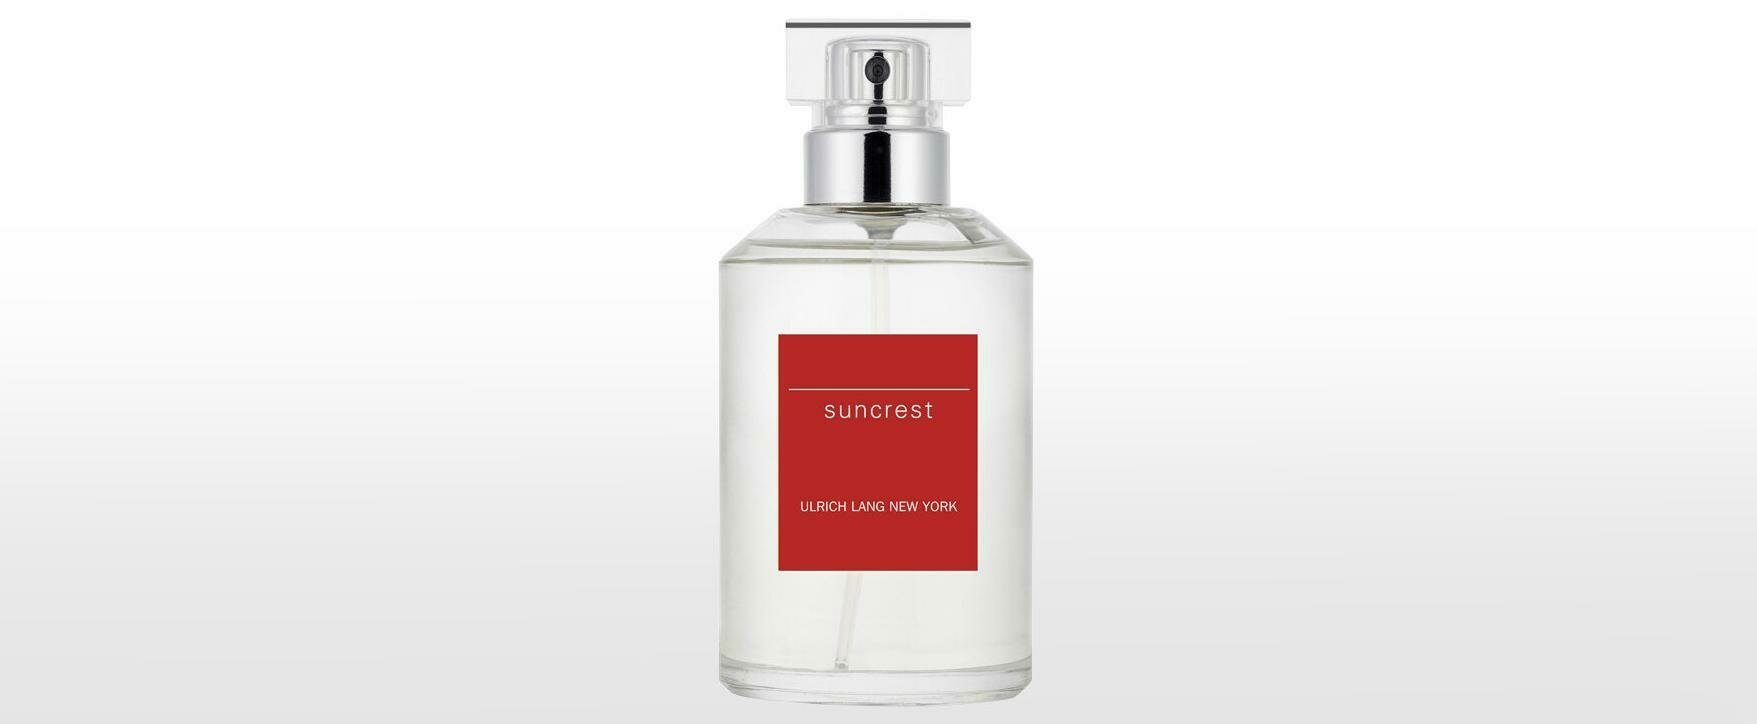 Suncrest: The Summery Fragrance Novelty by Ulrich Lang 